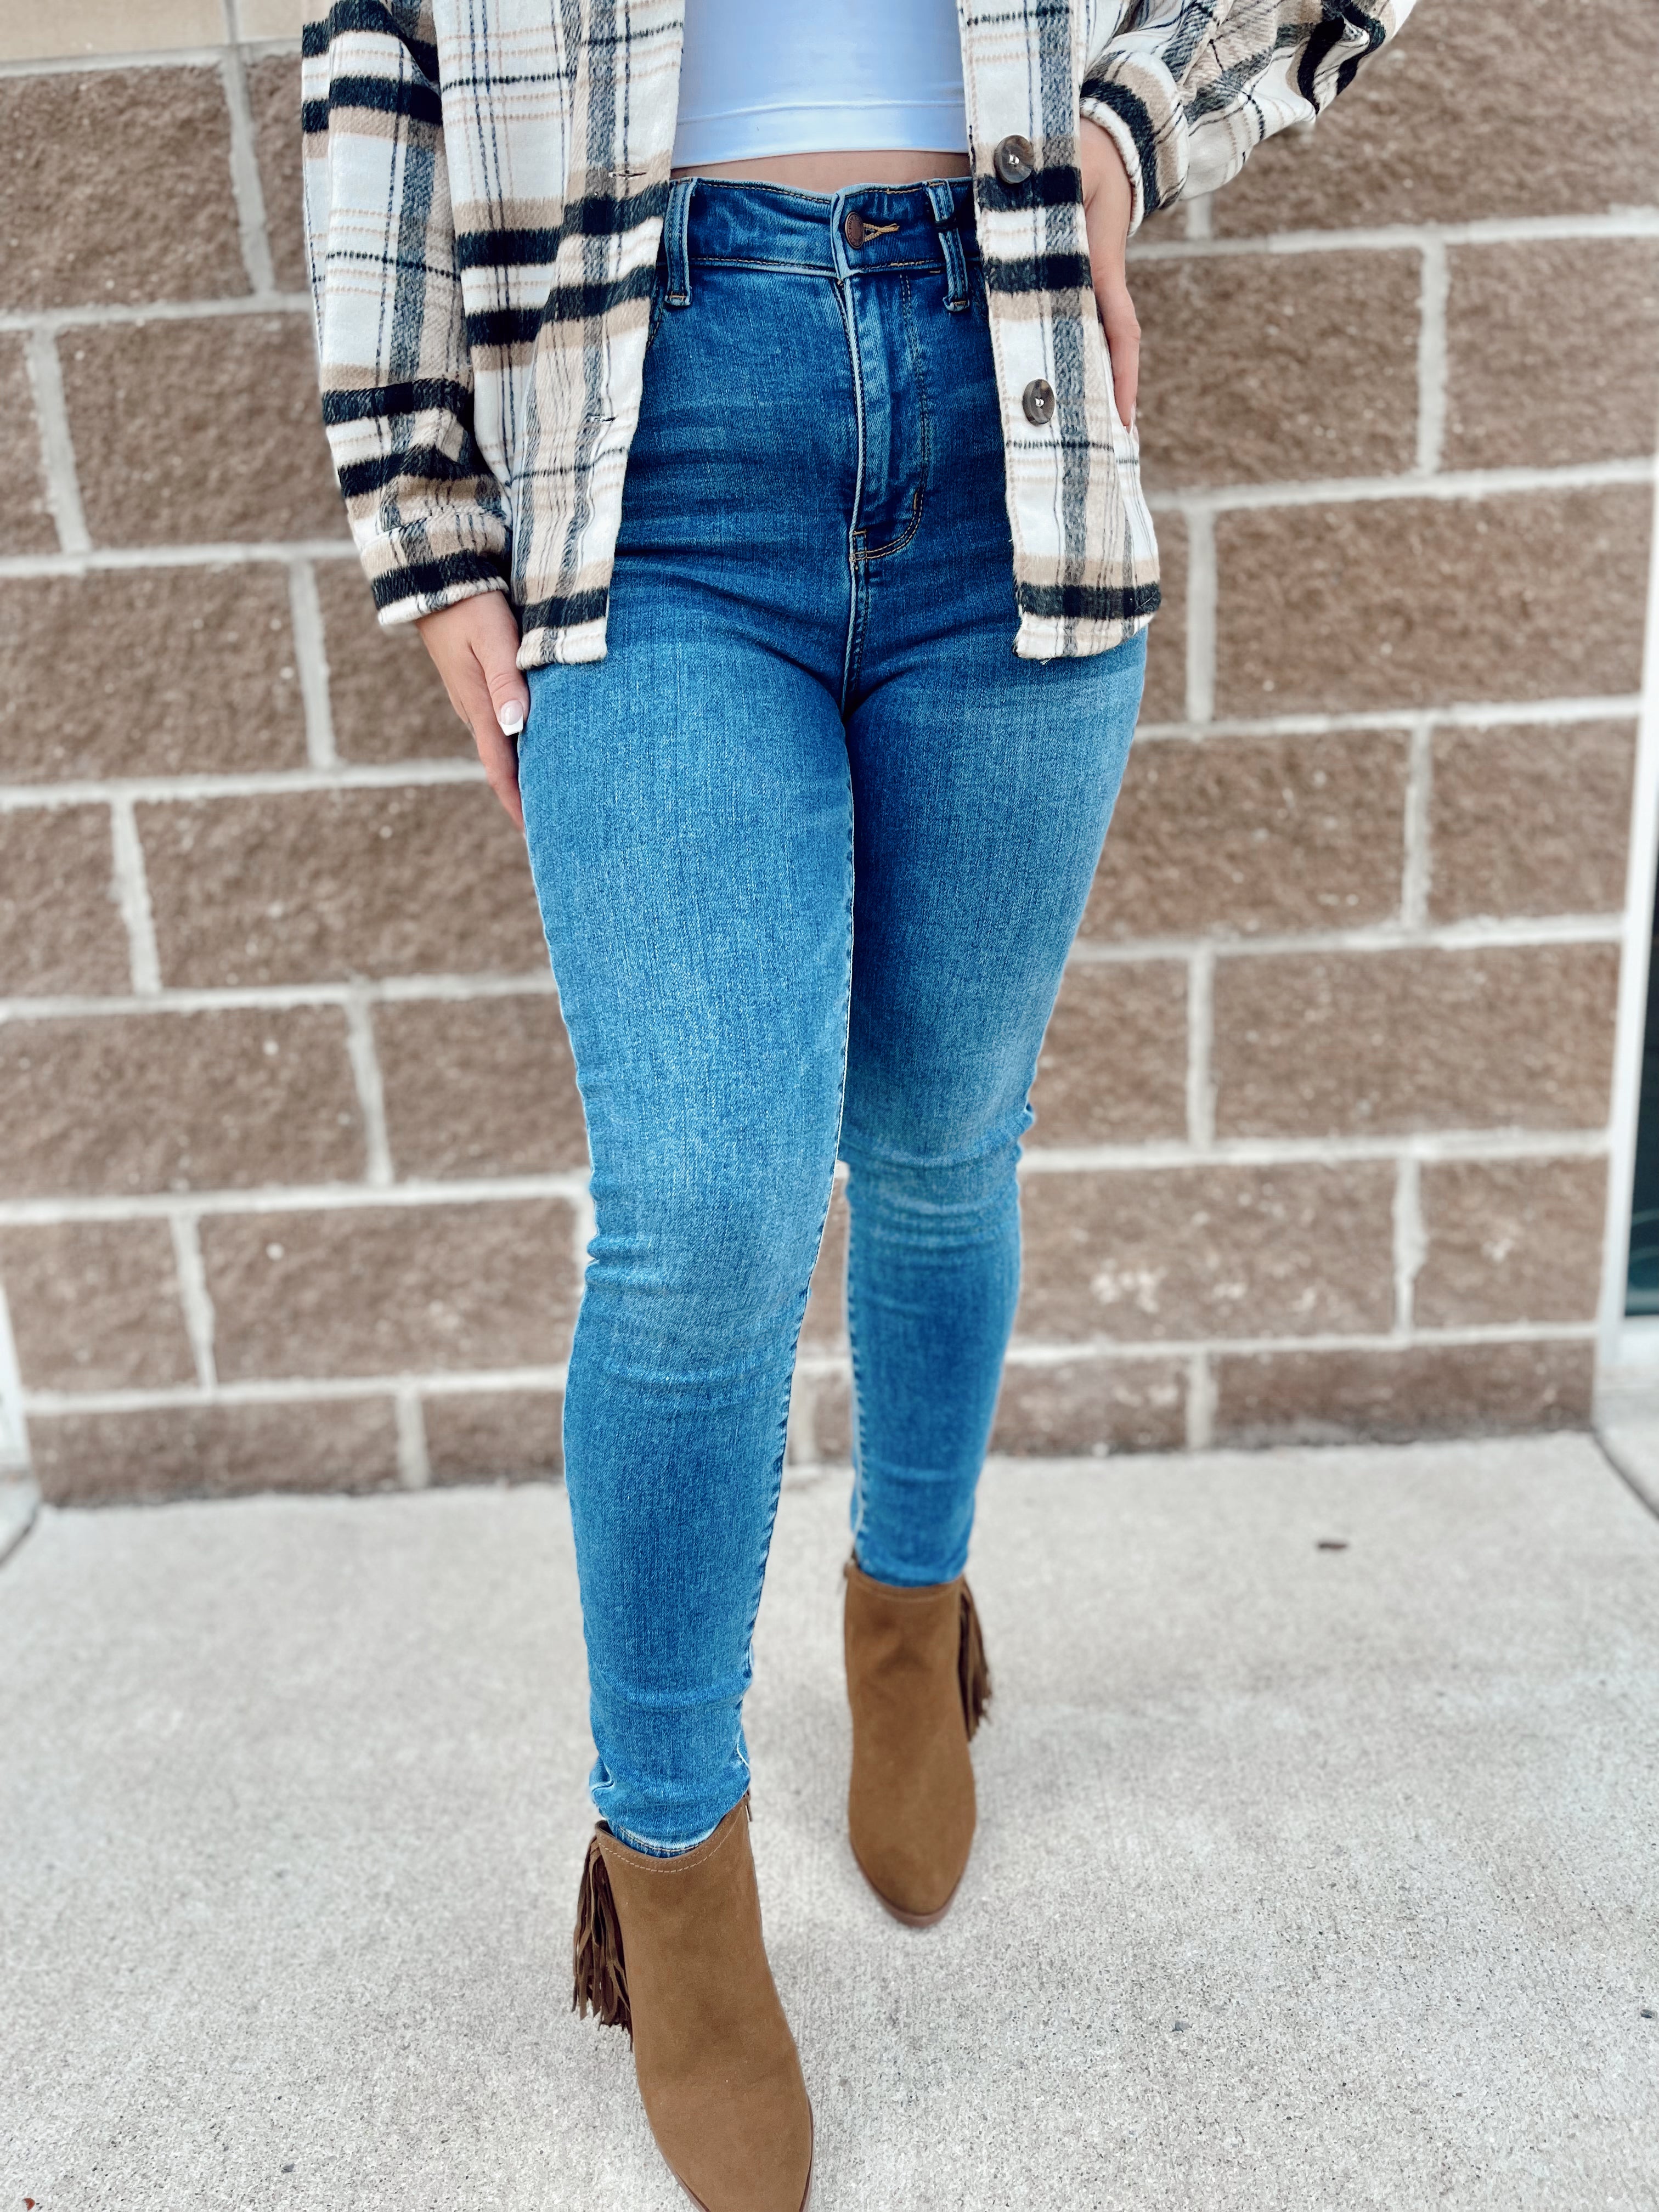 Thermal Judy Blues – the Savvy Jean